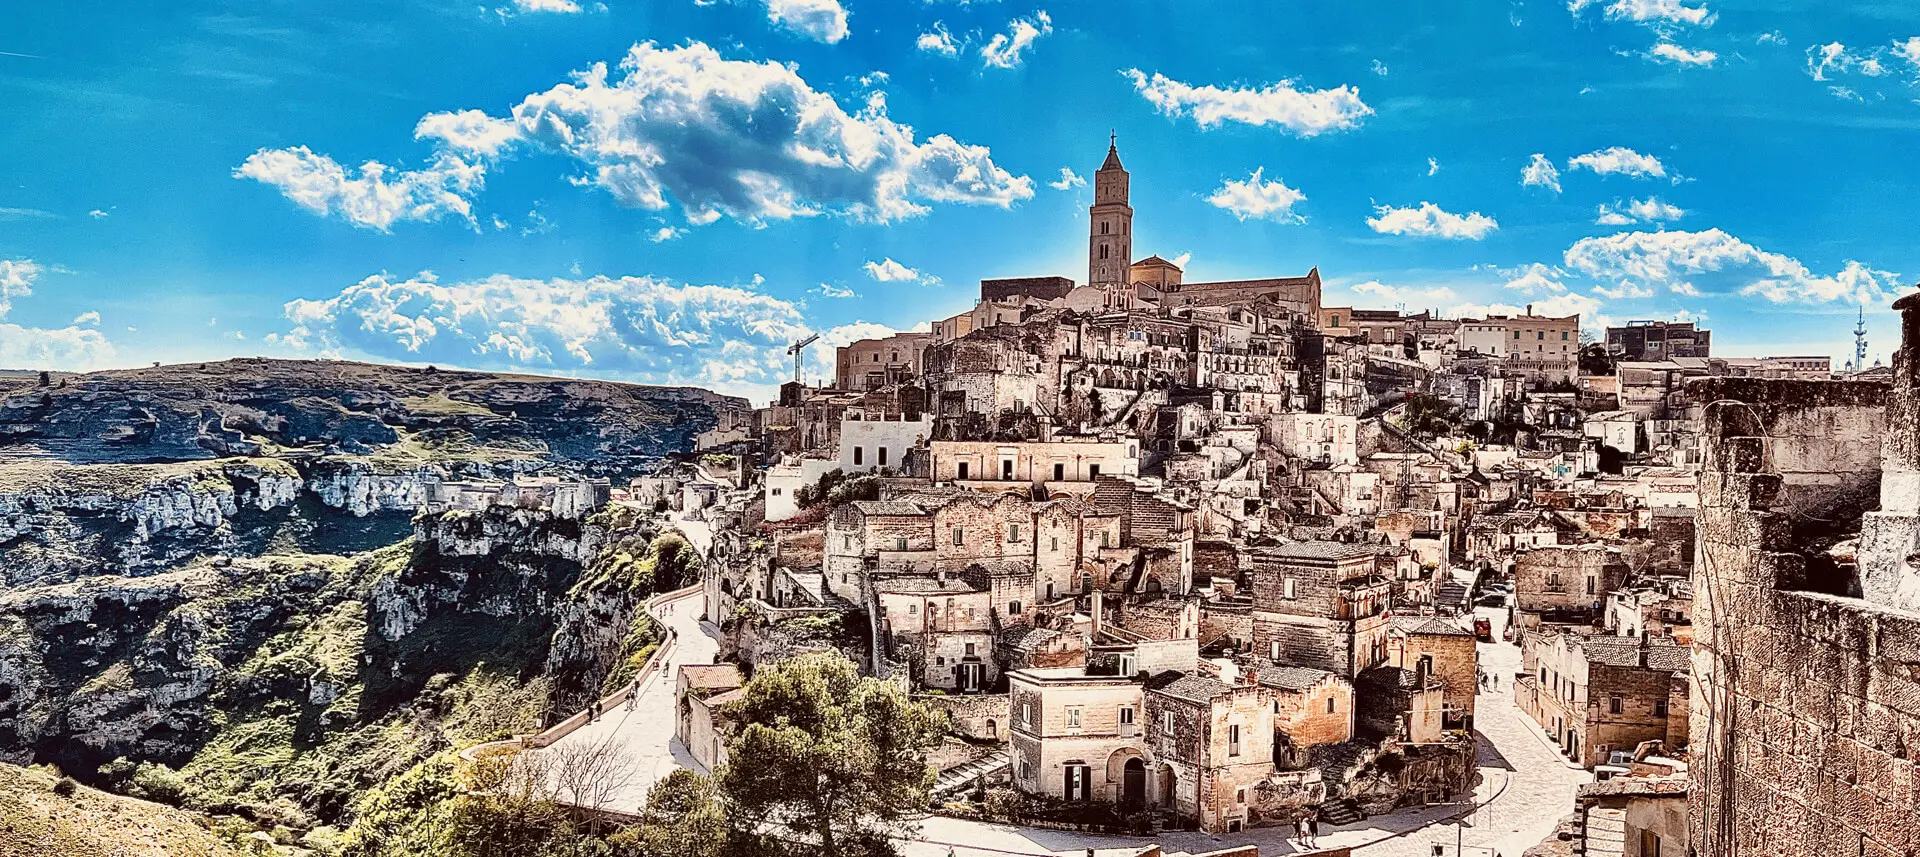 A view of the town of matera in italy.